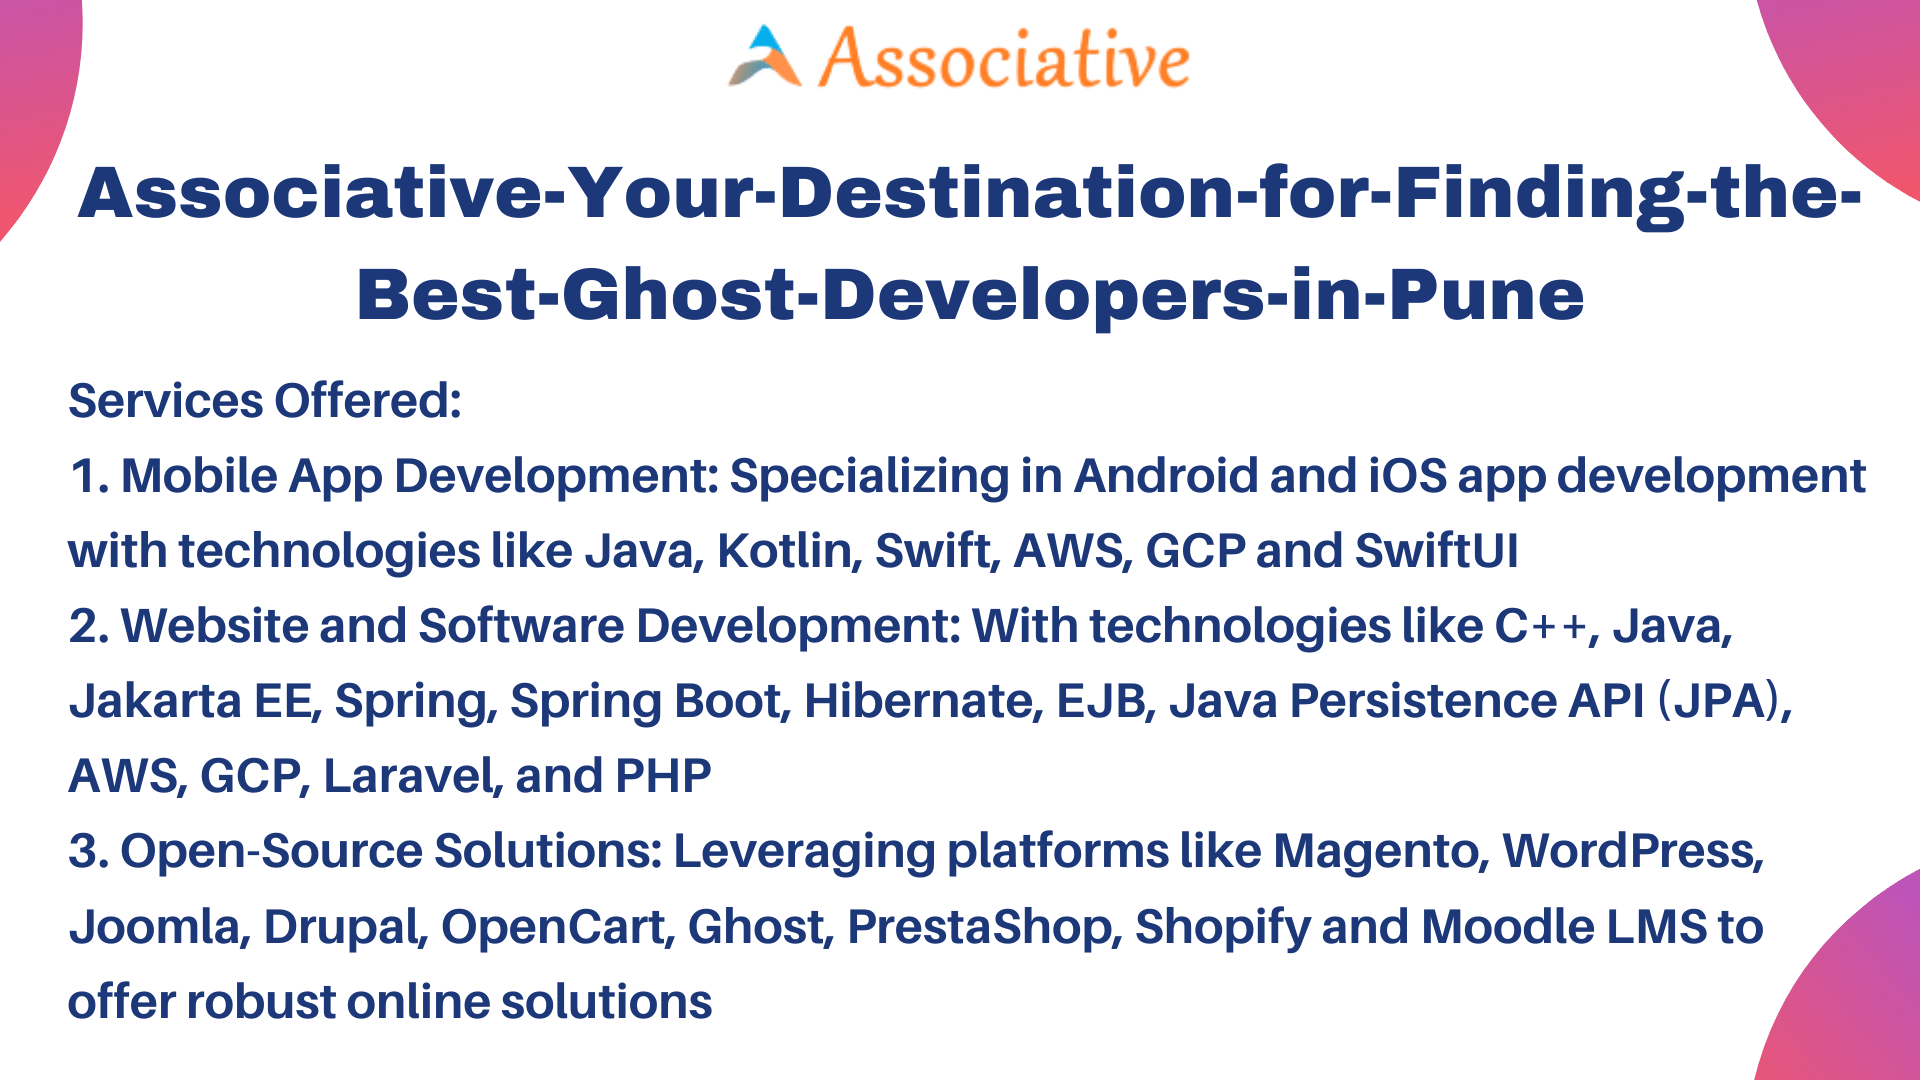 Associative Your Destination for Finding the Best Ghost Developers in Pune